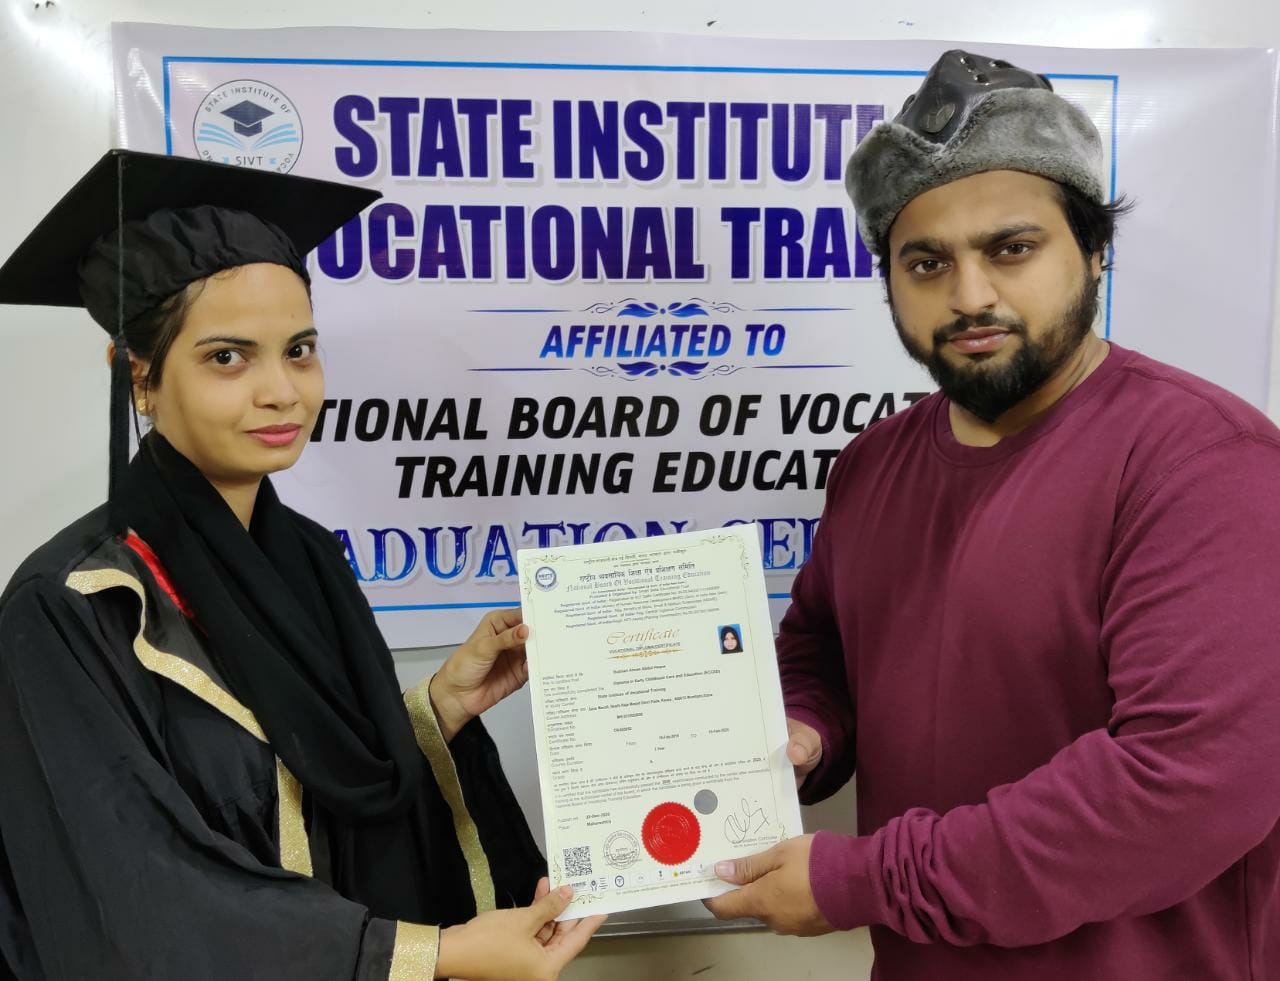 Certificate Distributed